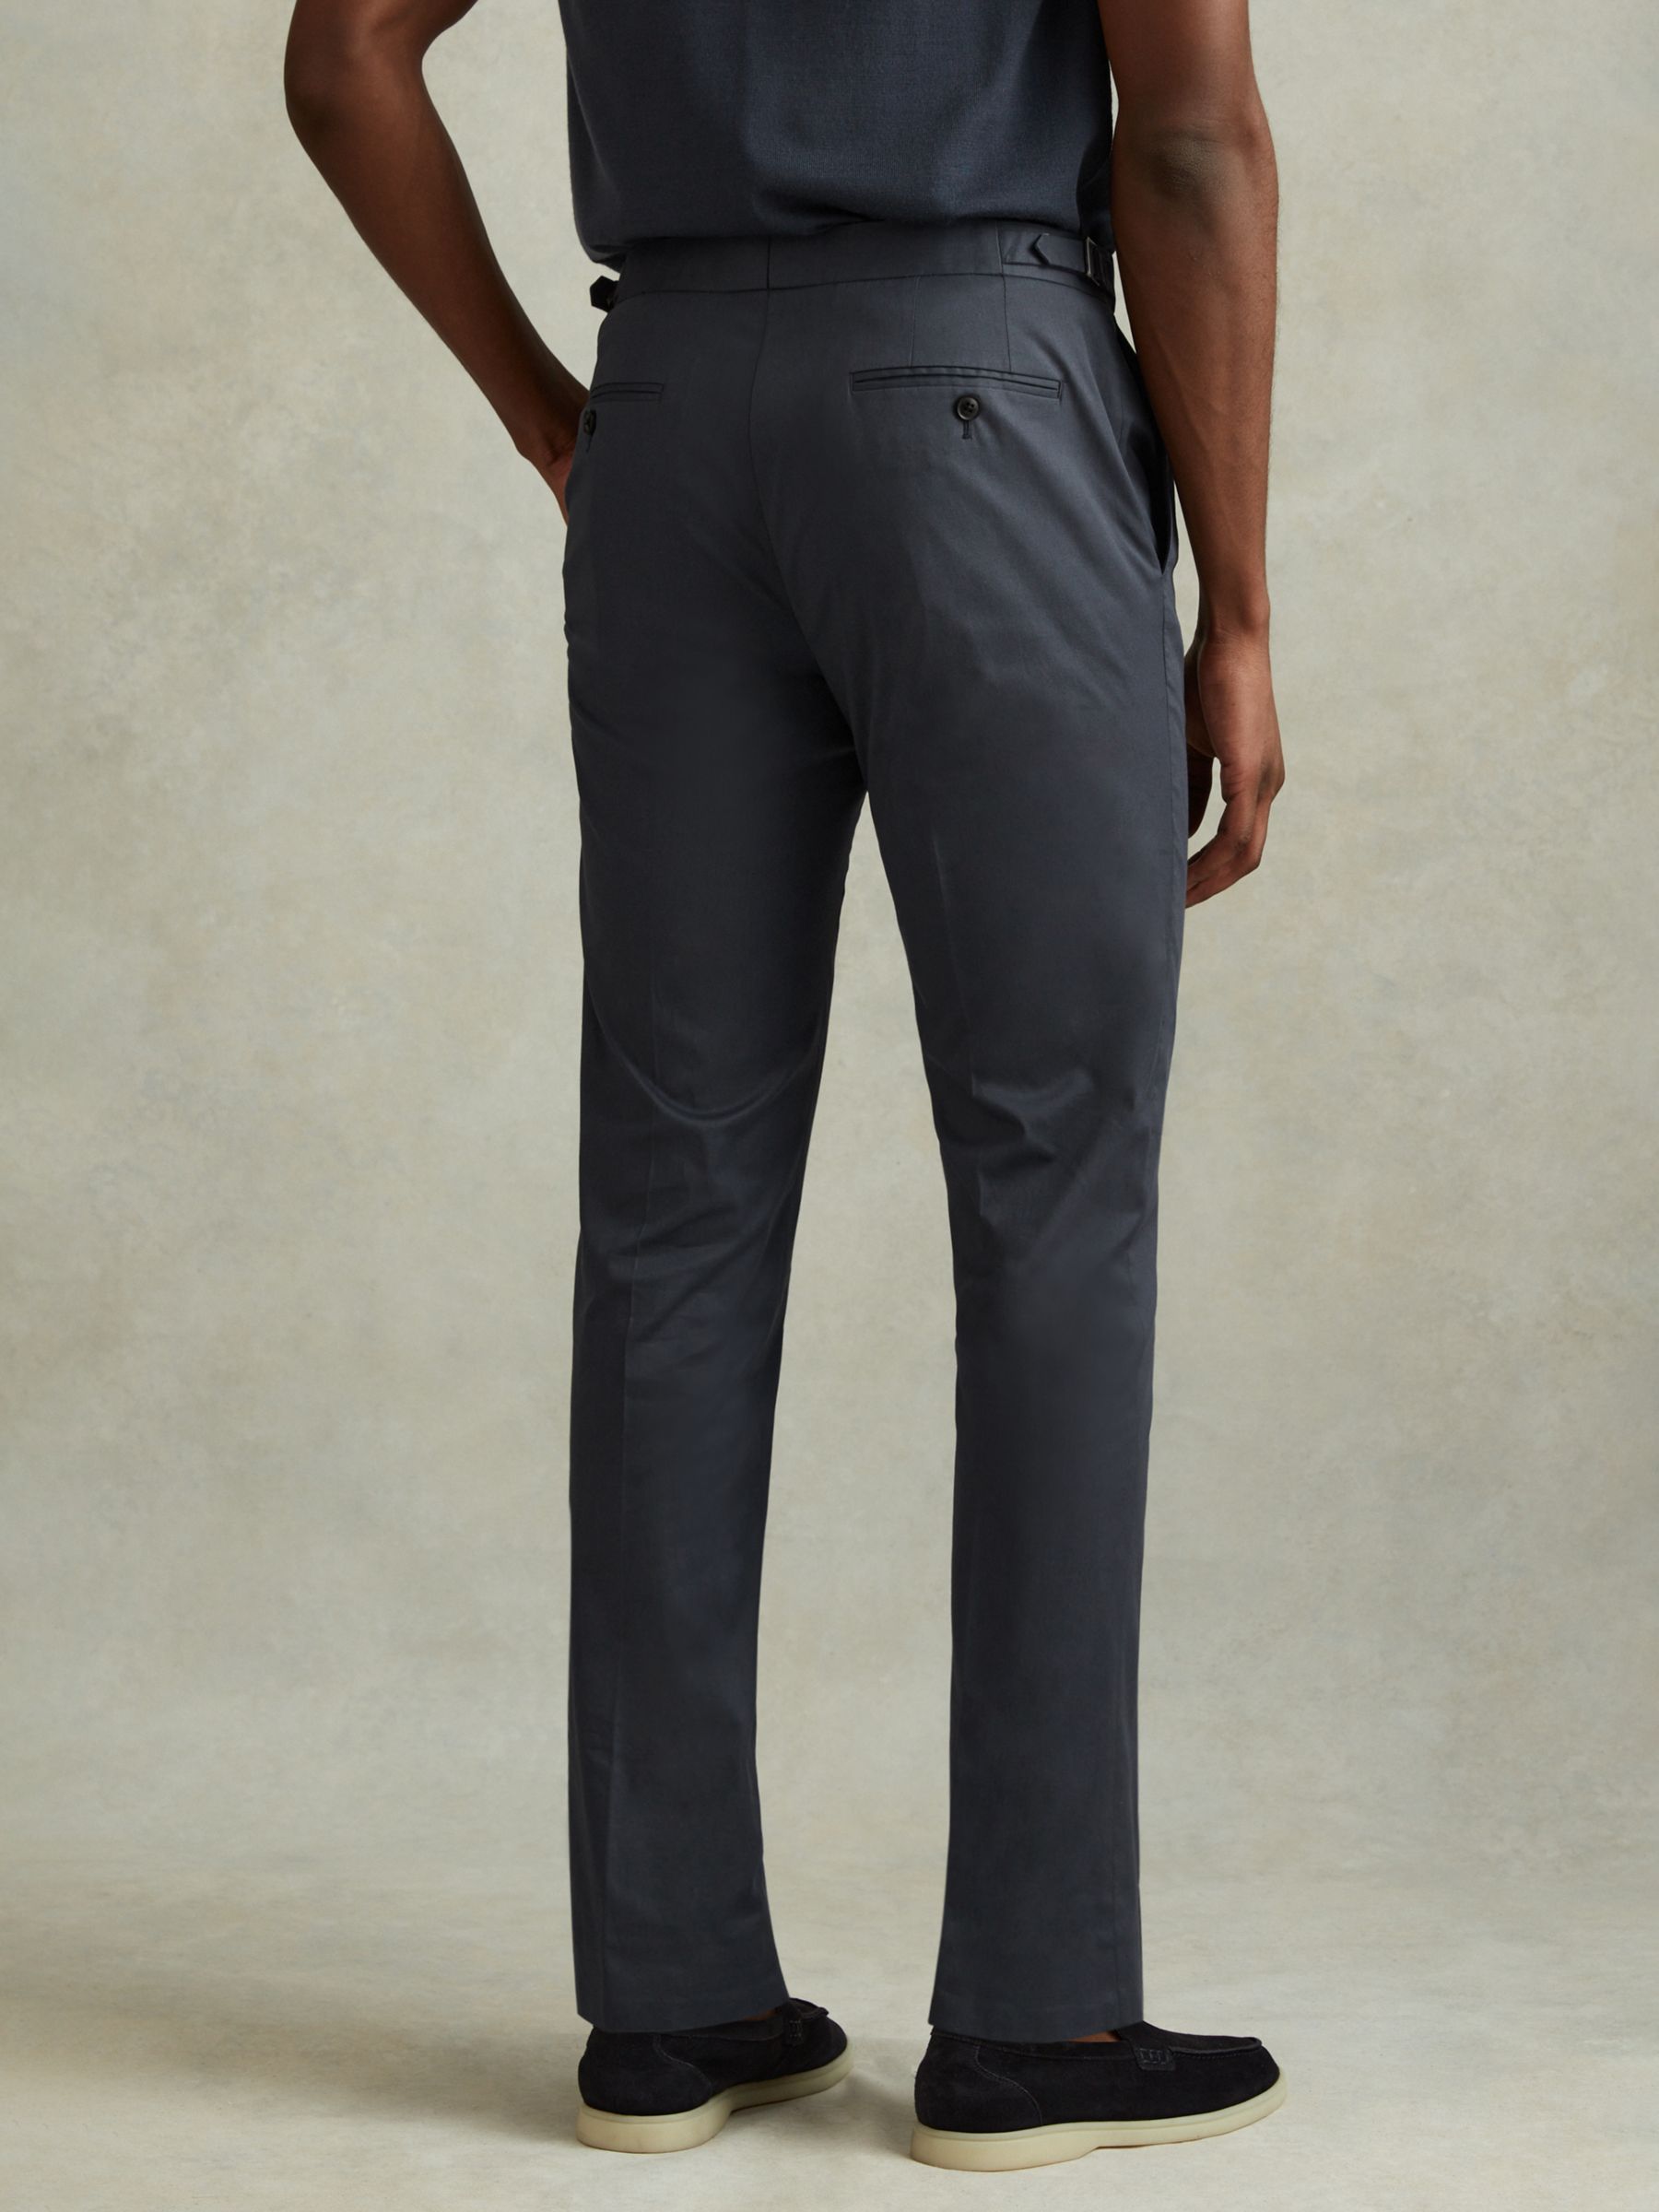 Reiss Crawford Trousers, Airforce Blue, 28R